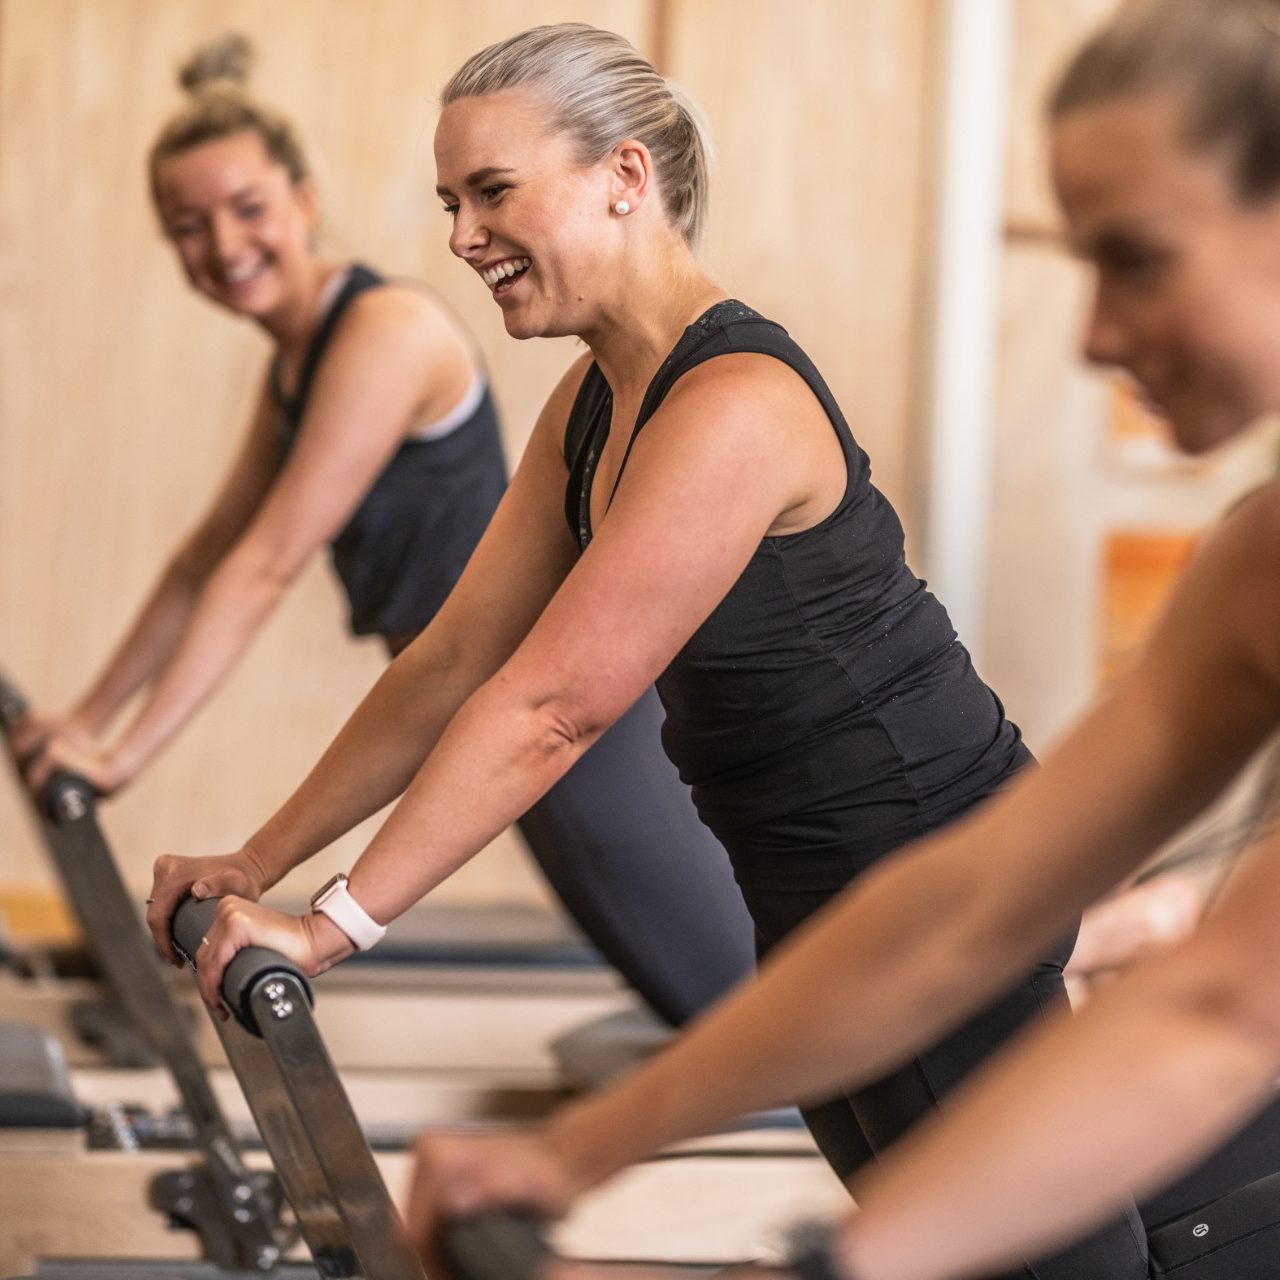 Woman on reformer laughing, blurred woman in background smiles